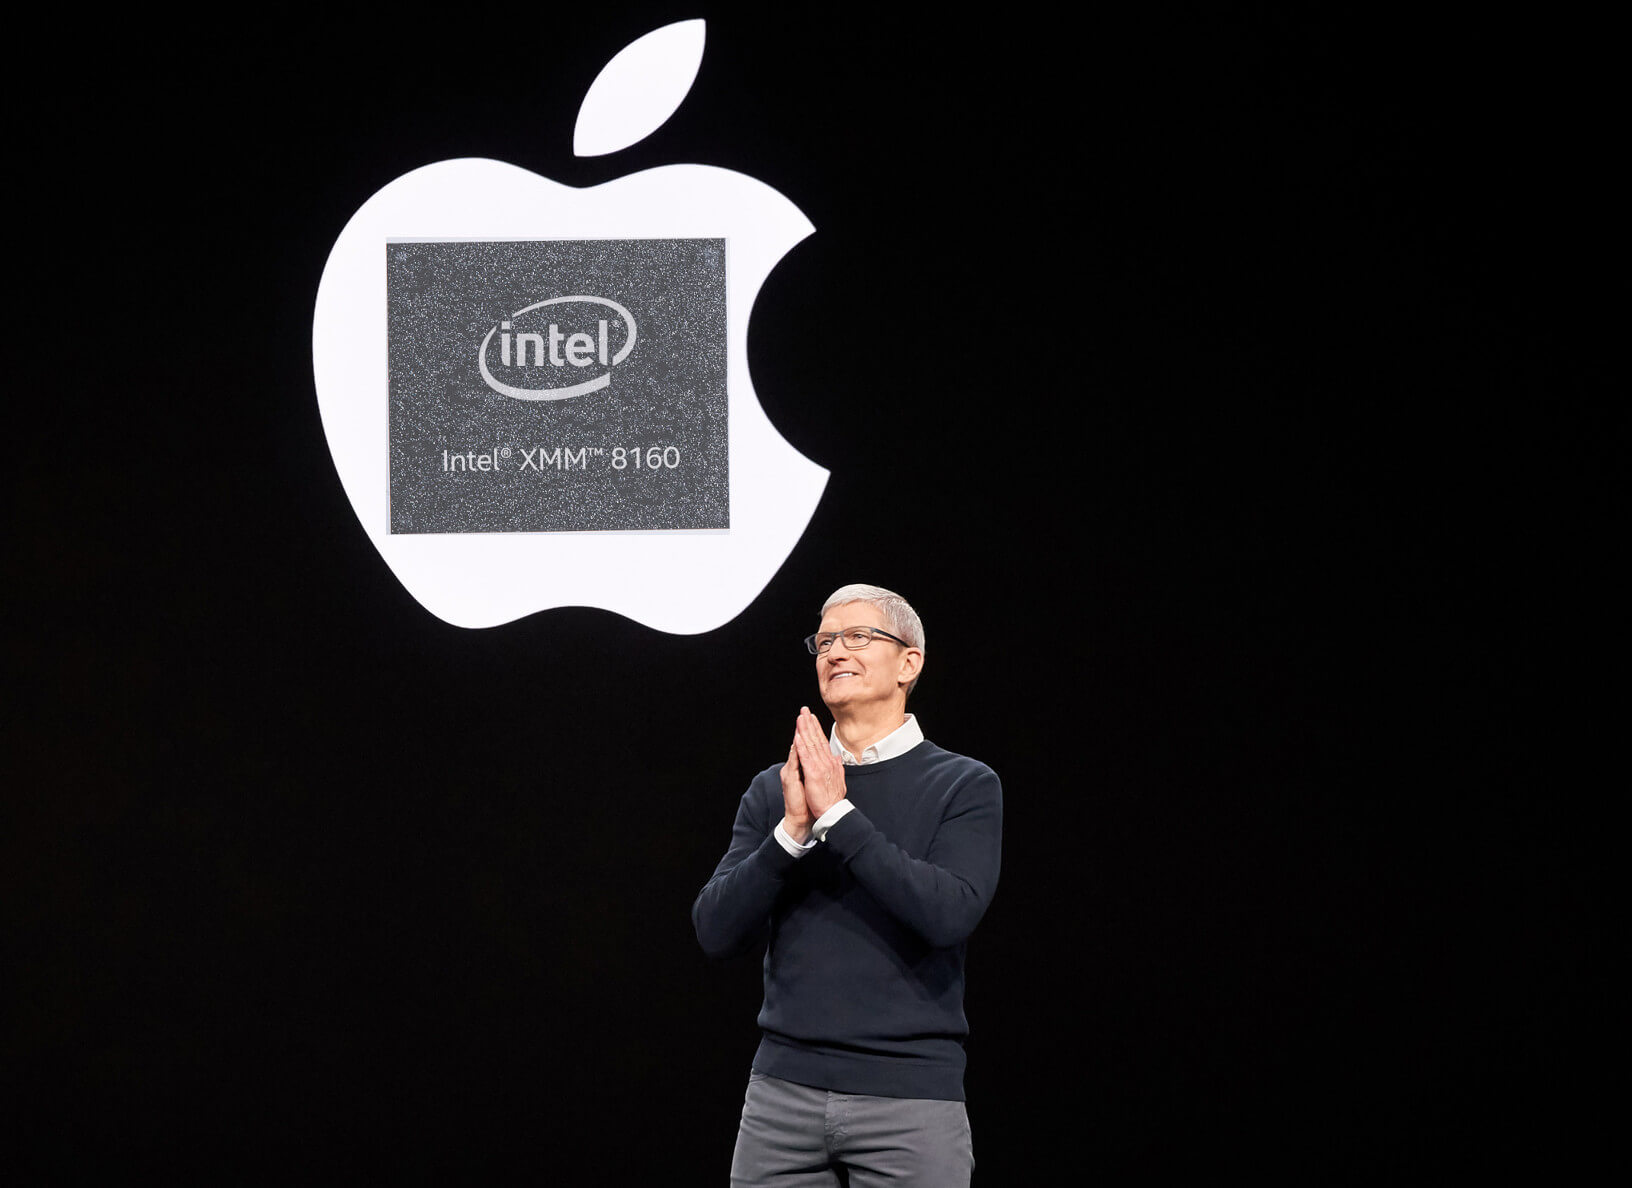 Apple is close to acquiring Intel's 5G modem business for $1 billion